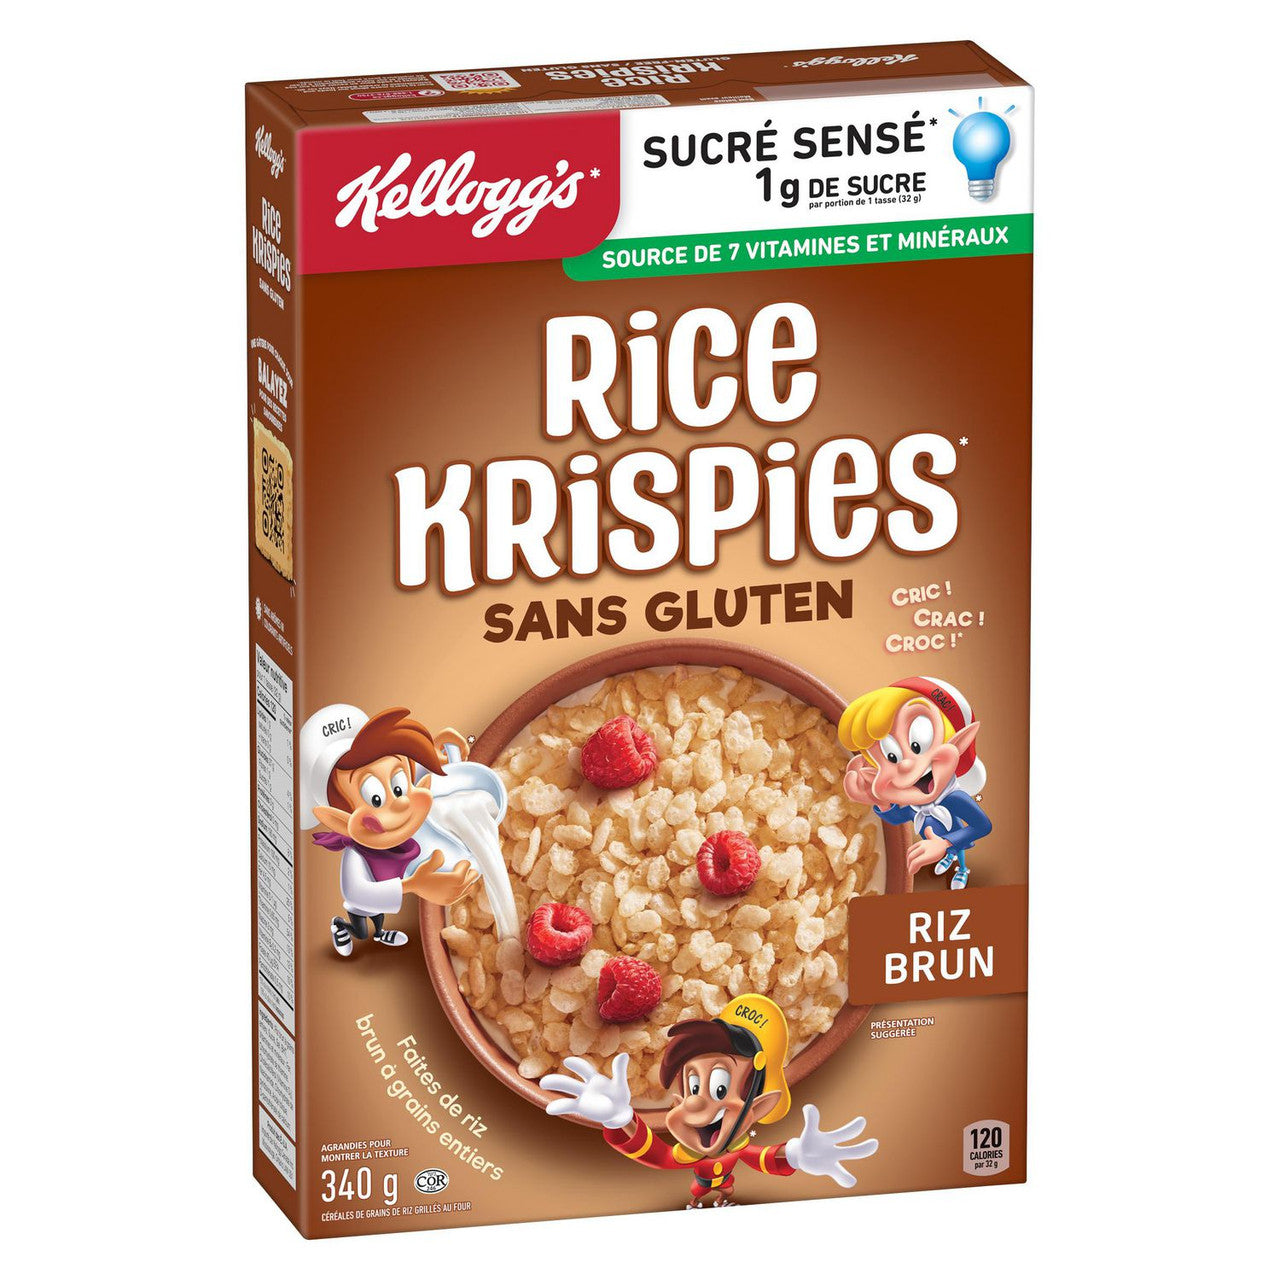 Kellogg's Rice Krispies Gluten Free Cereal, Whole Grain Brown Rice {Canadian}